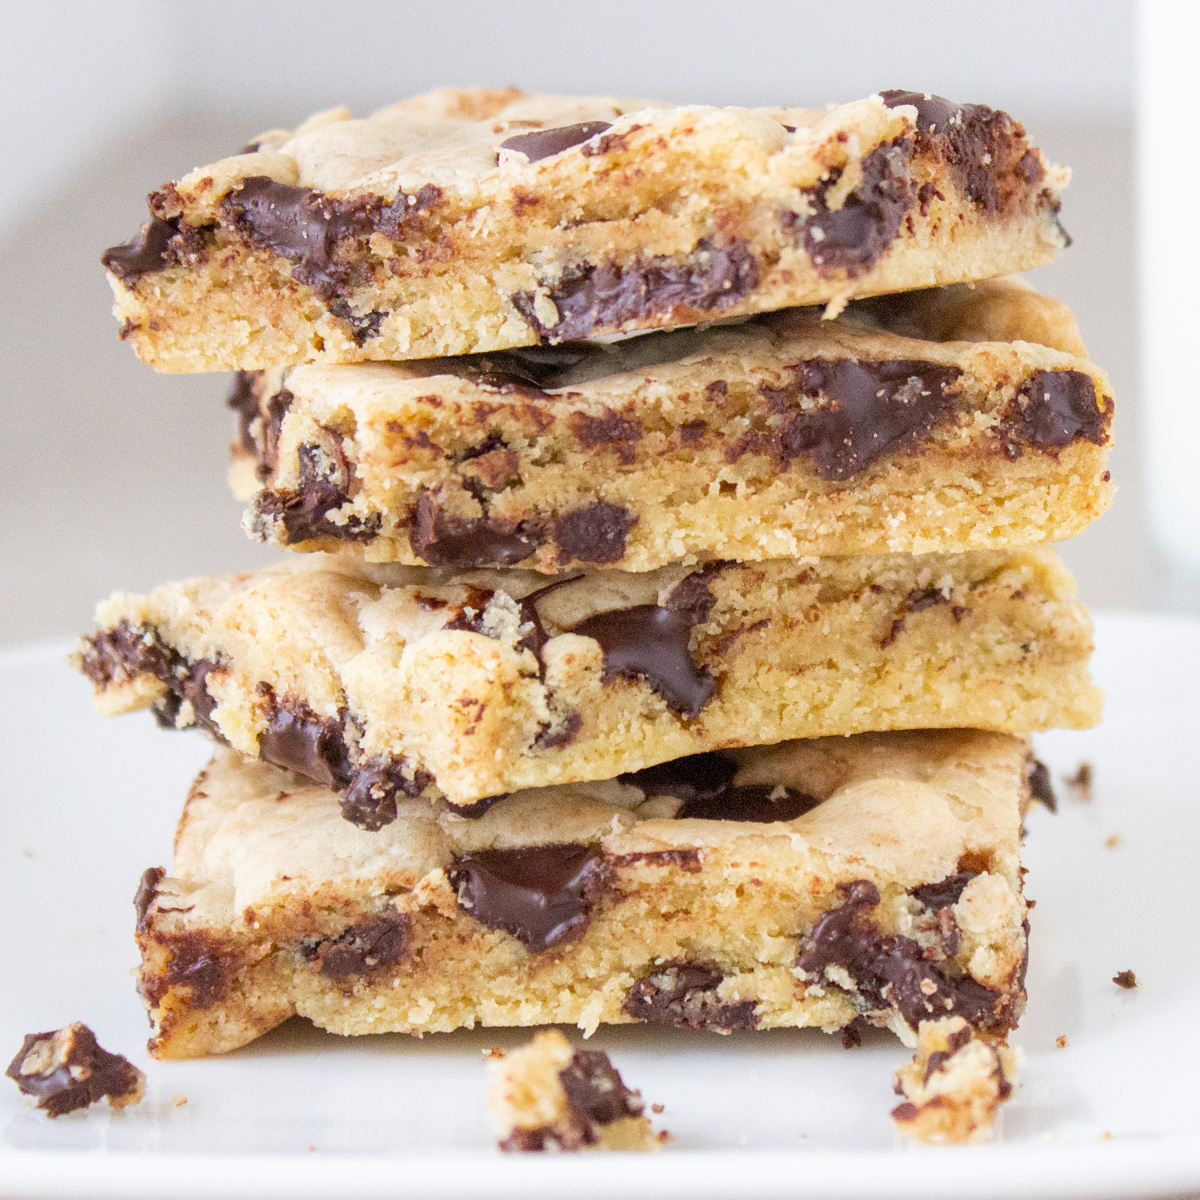 4 chocolate chip bars stacked on a plate.